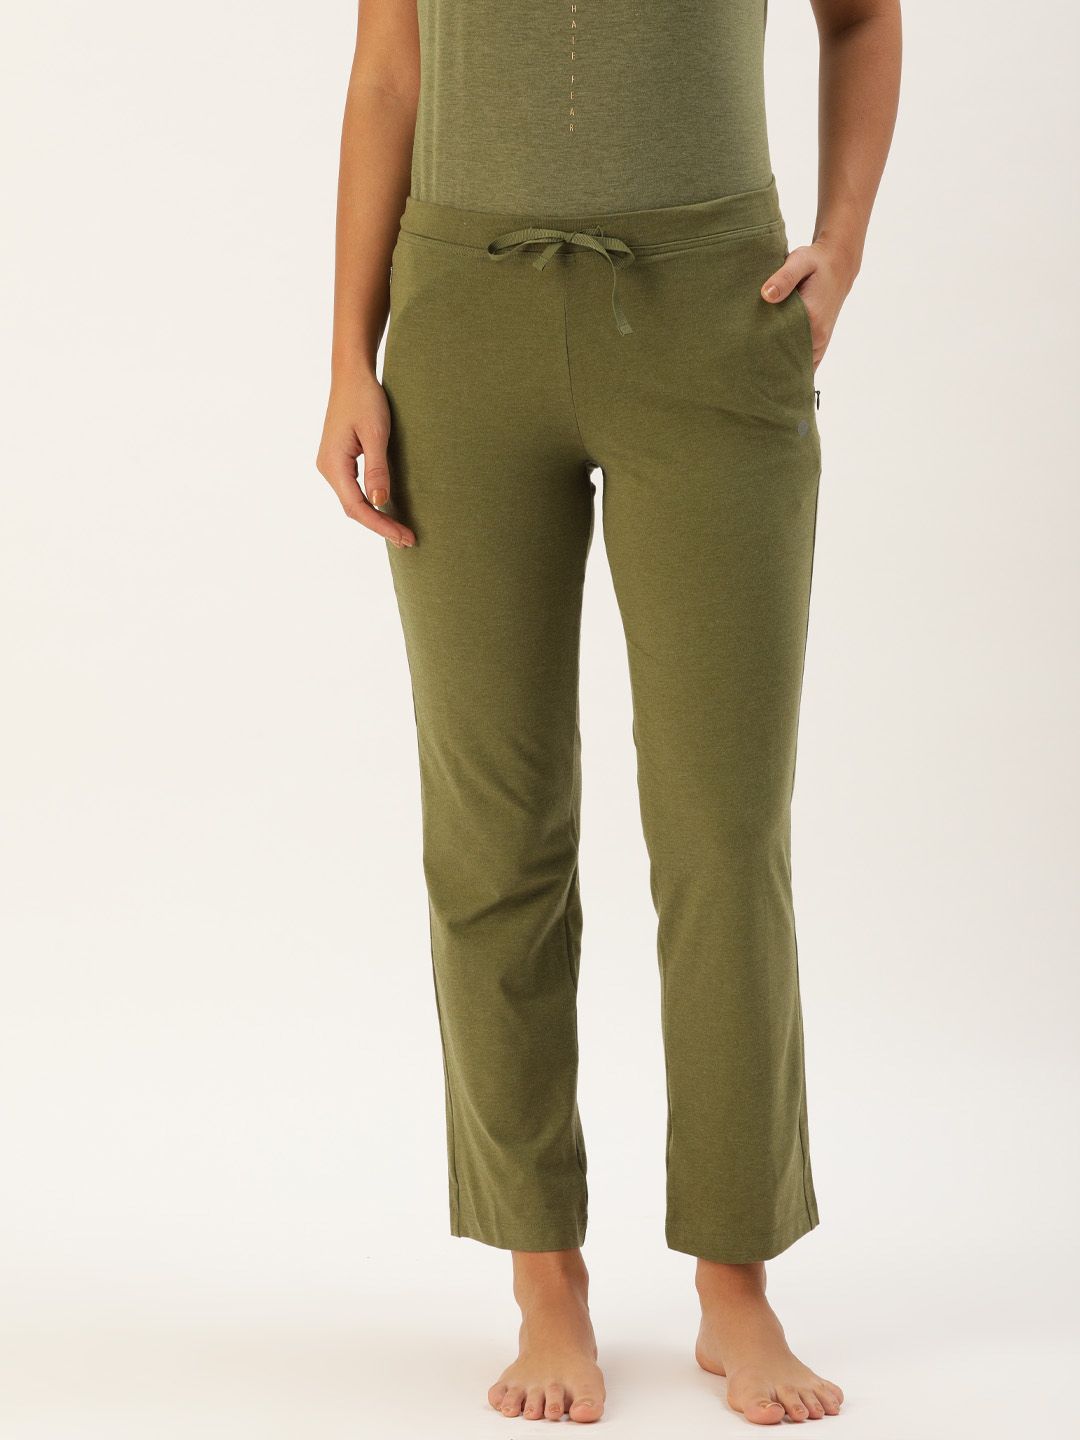 Enamor Women Olive Green Slim Fit Pull on Lounge Pants Price in India